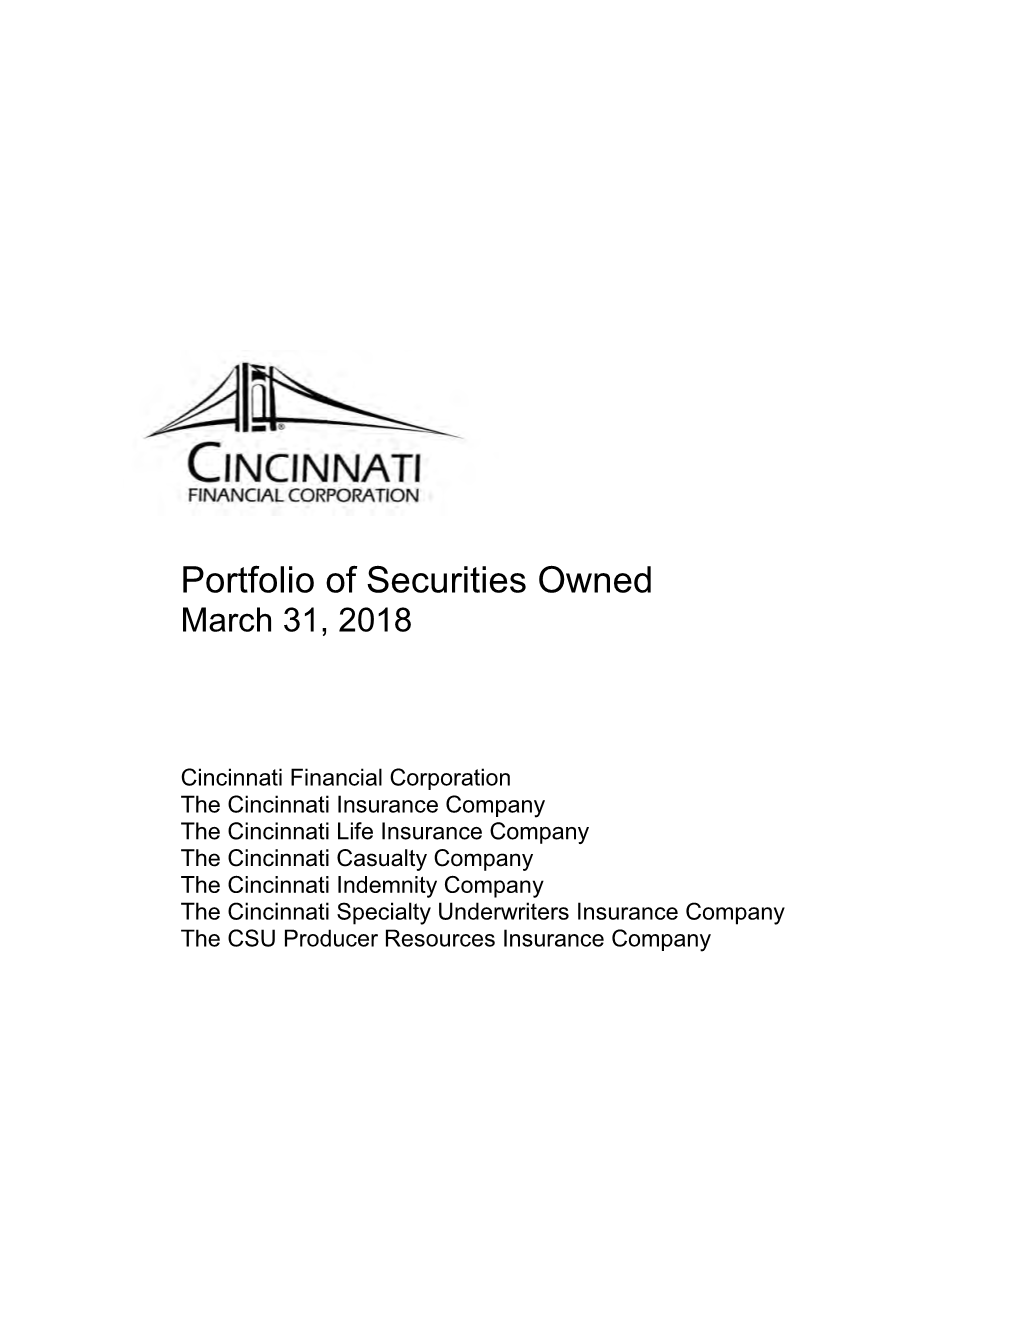 Portfolio of Securities Owned March 31, 2018